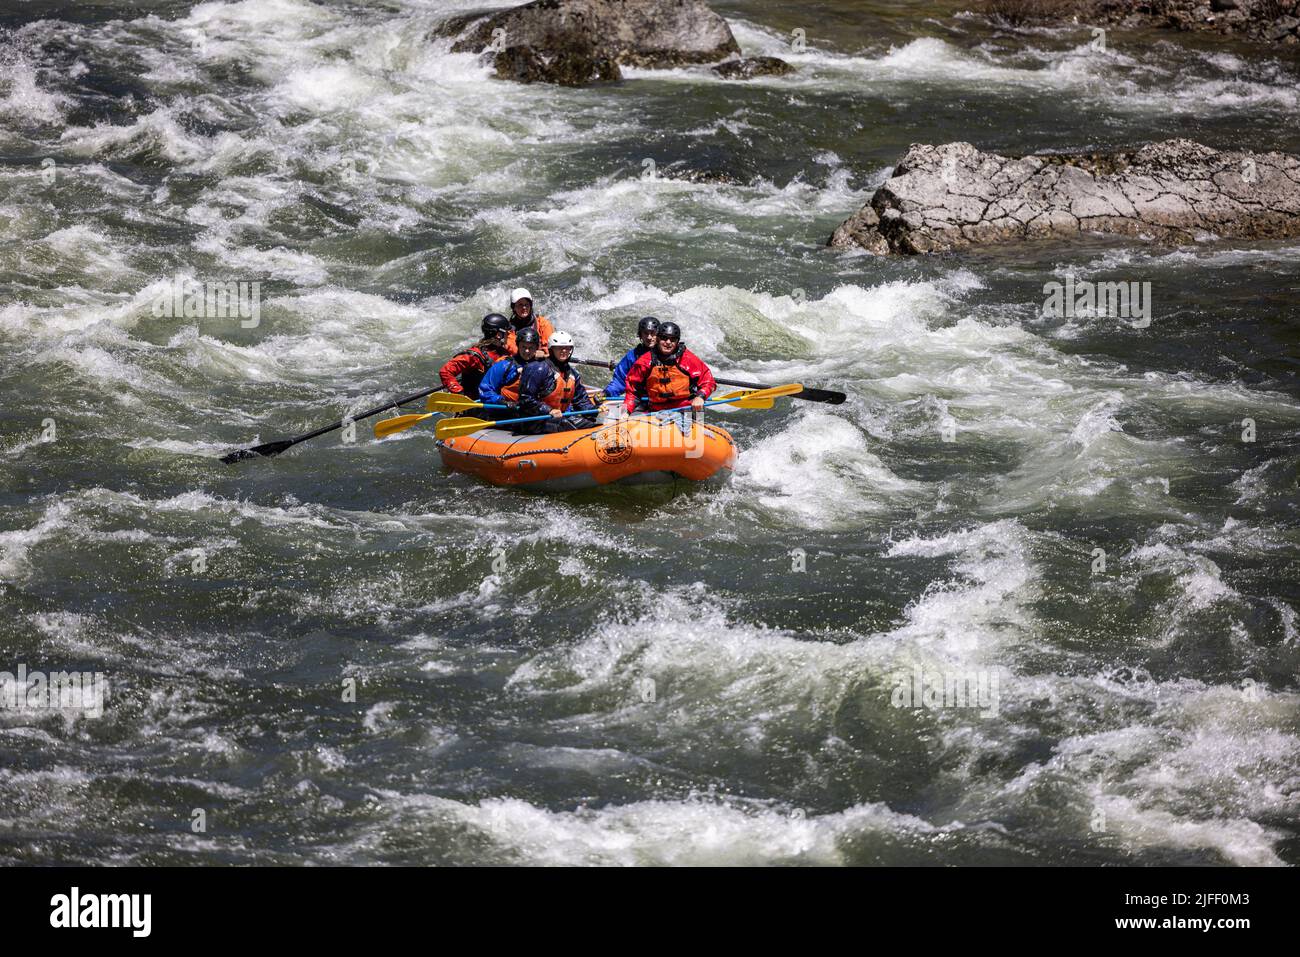 Koskia, Idaho/USA - June 22, 2022: Rafters enjoying the high waters in the Lochsa river after a very wet winter and spring 2021/2022. Stock Photo